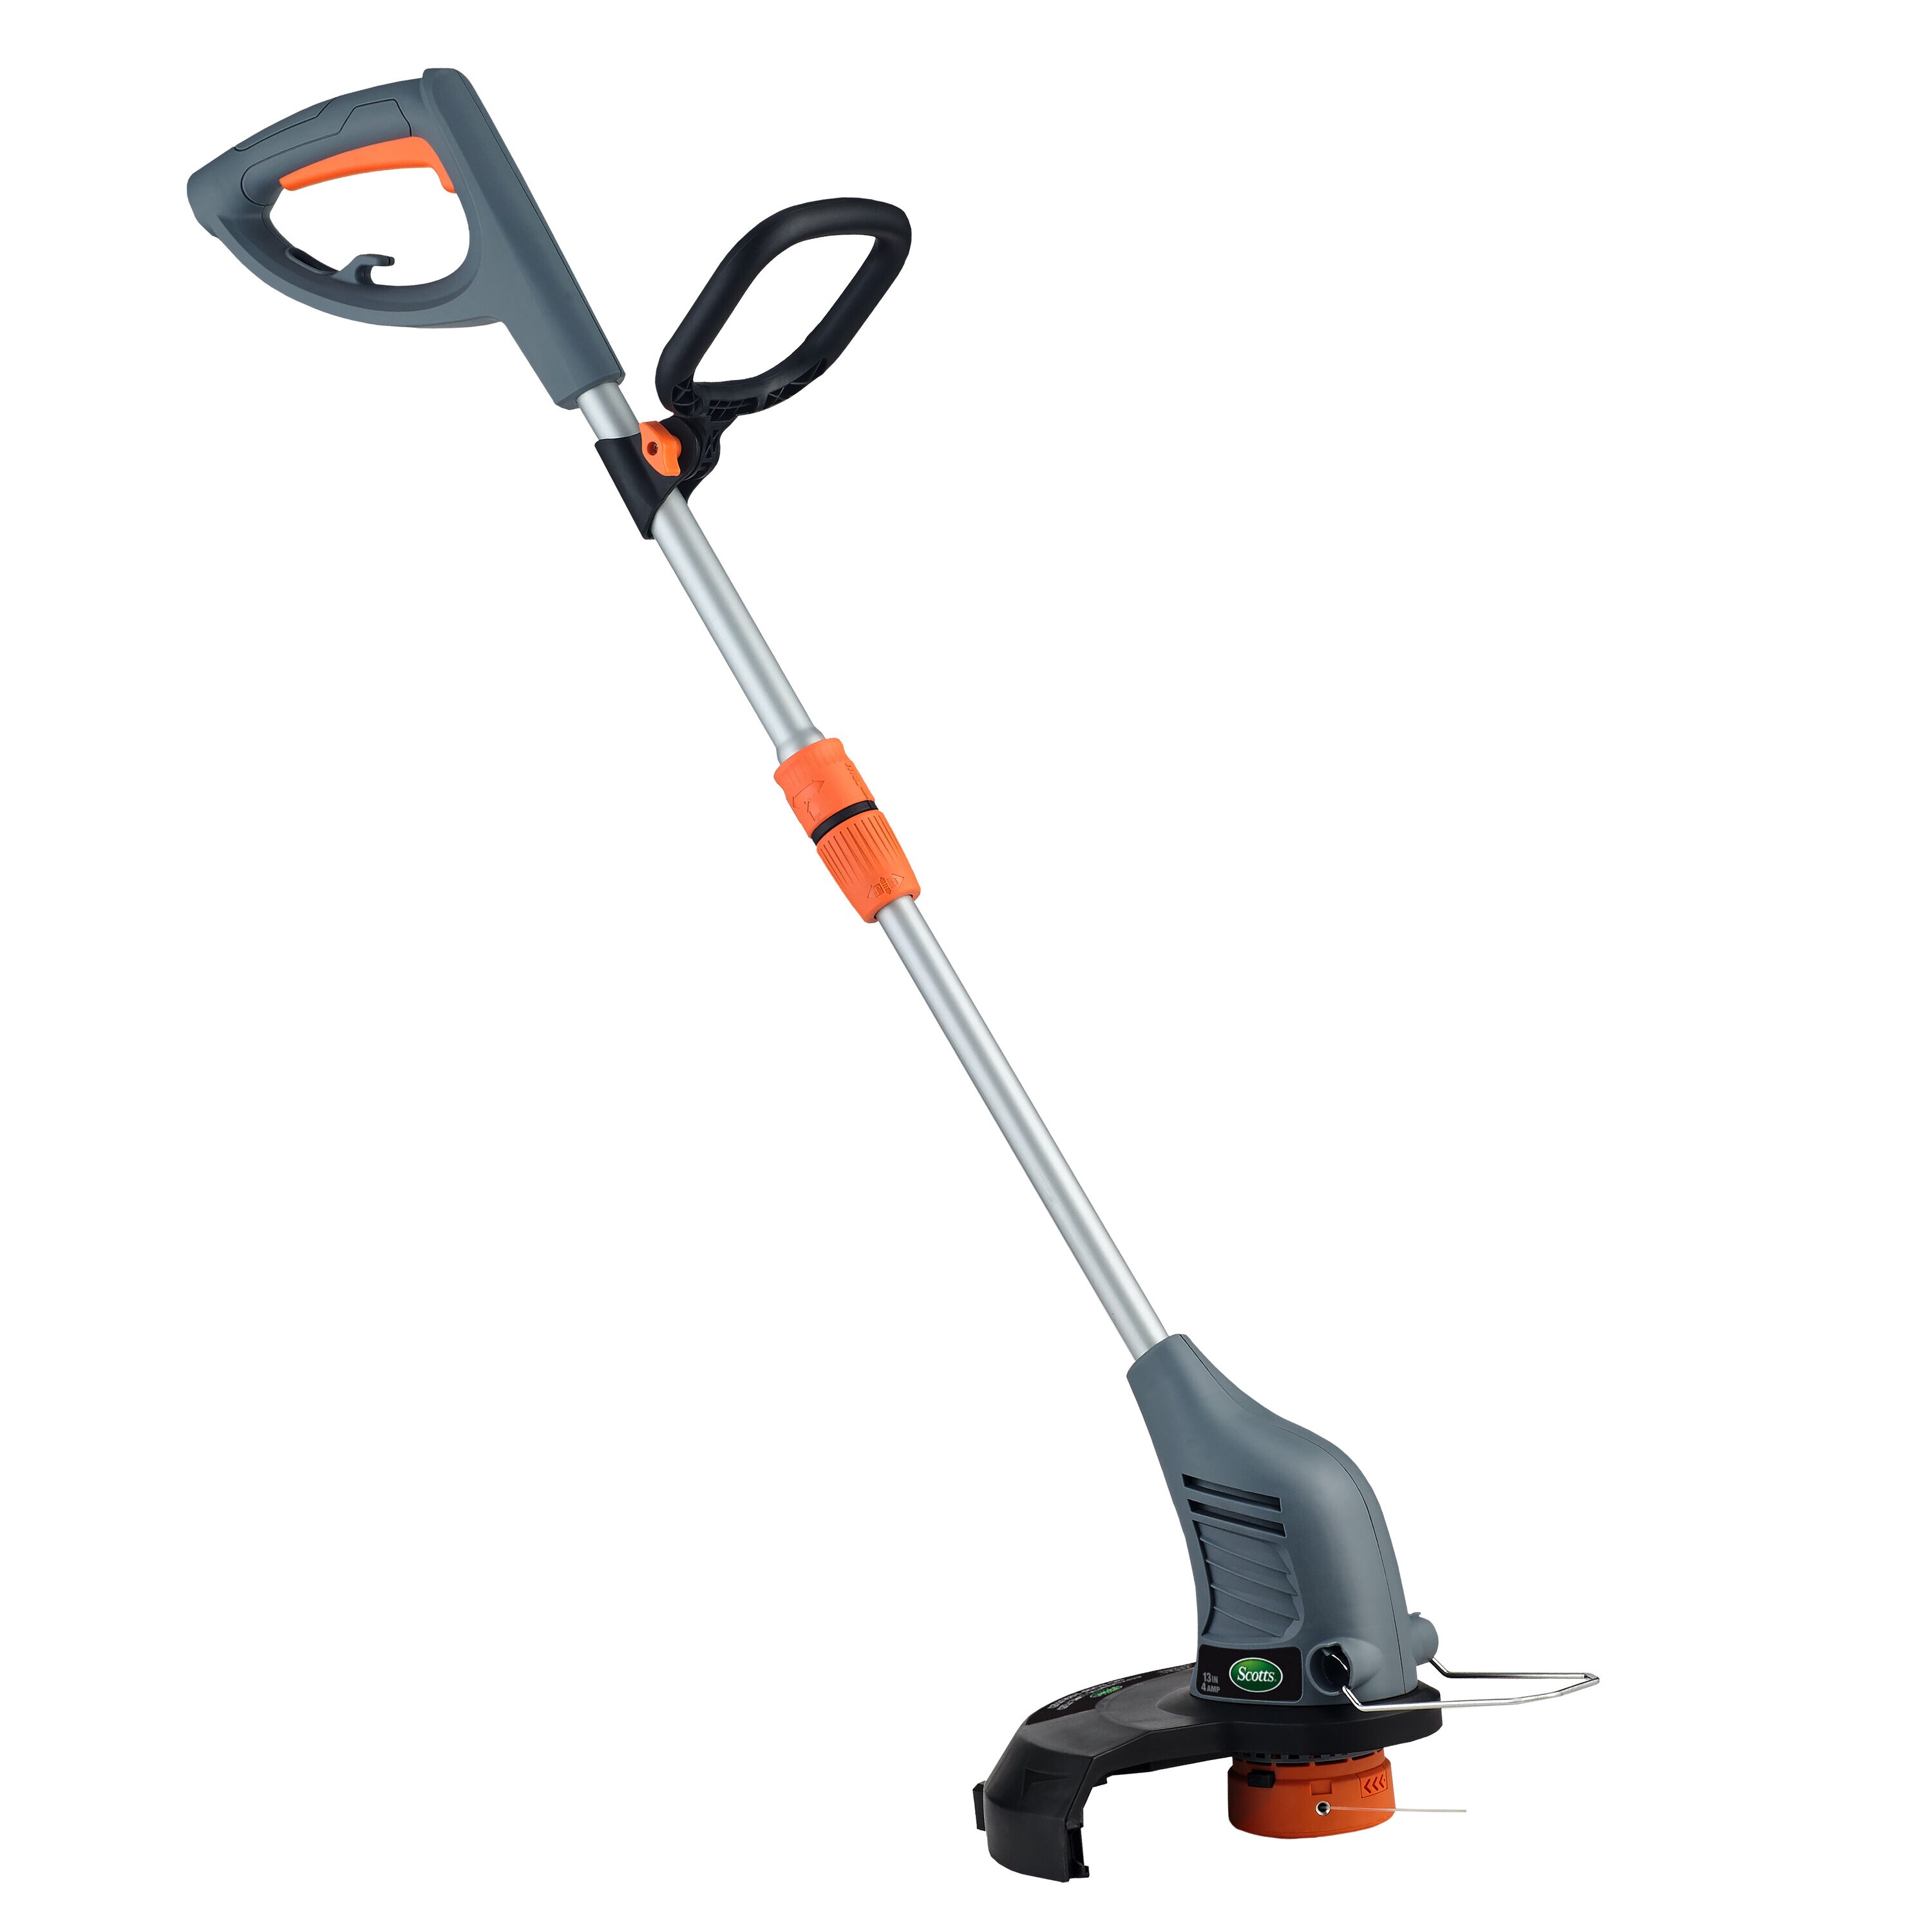 13in Black Decker Corded Electric String Trimmer Weed Eater Wacker